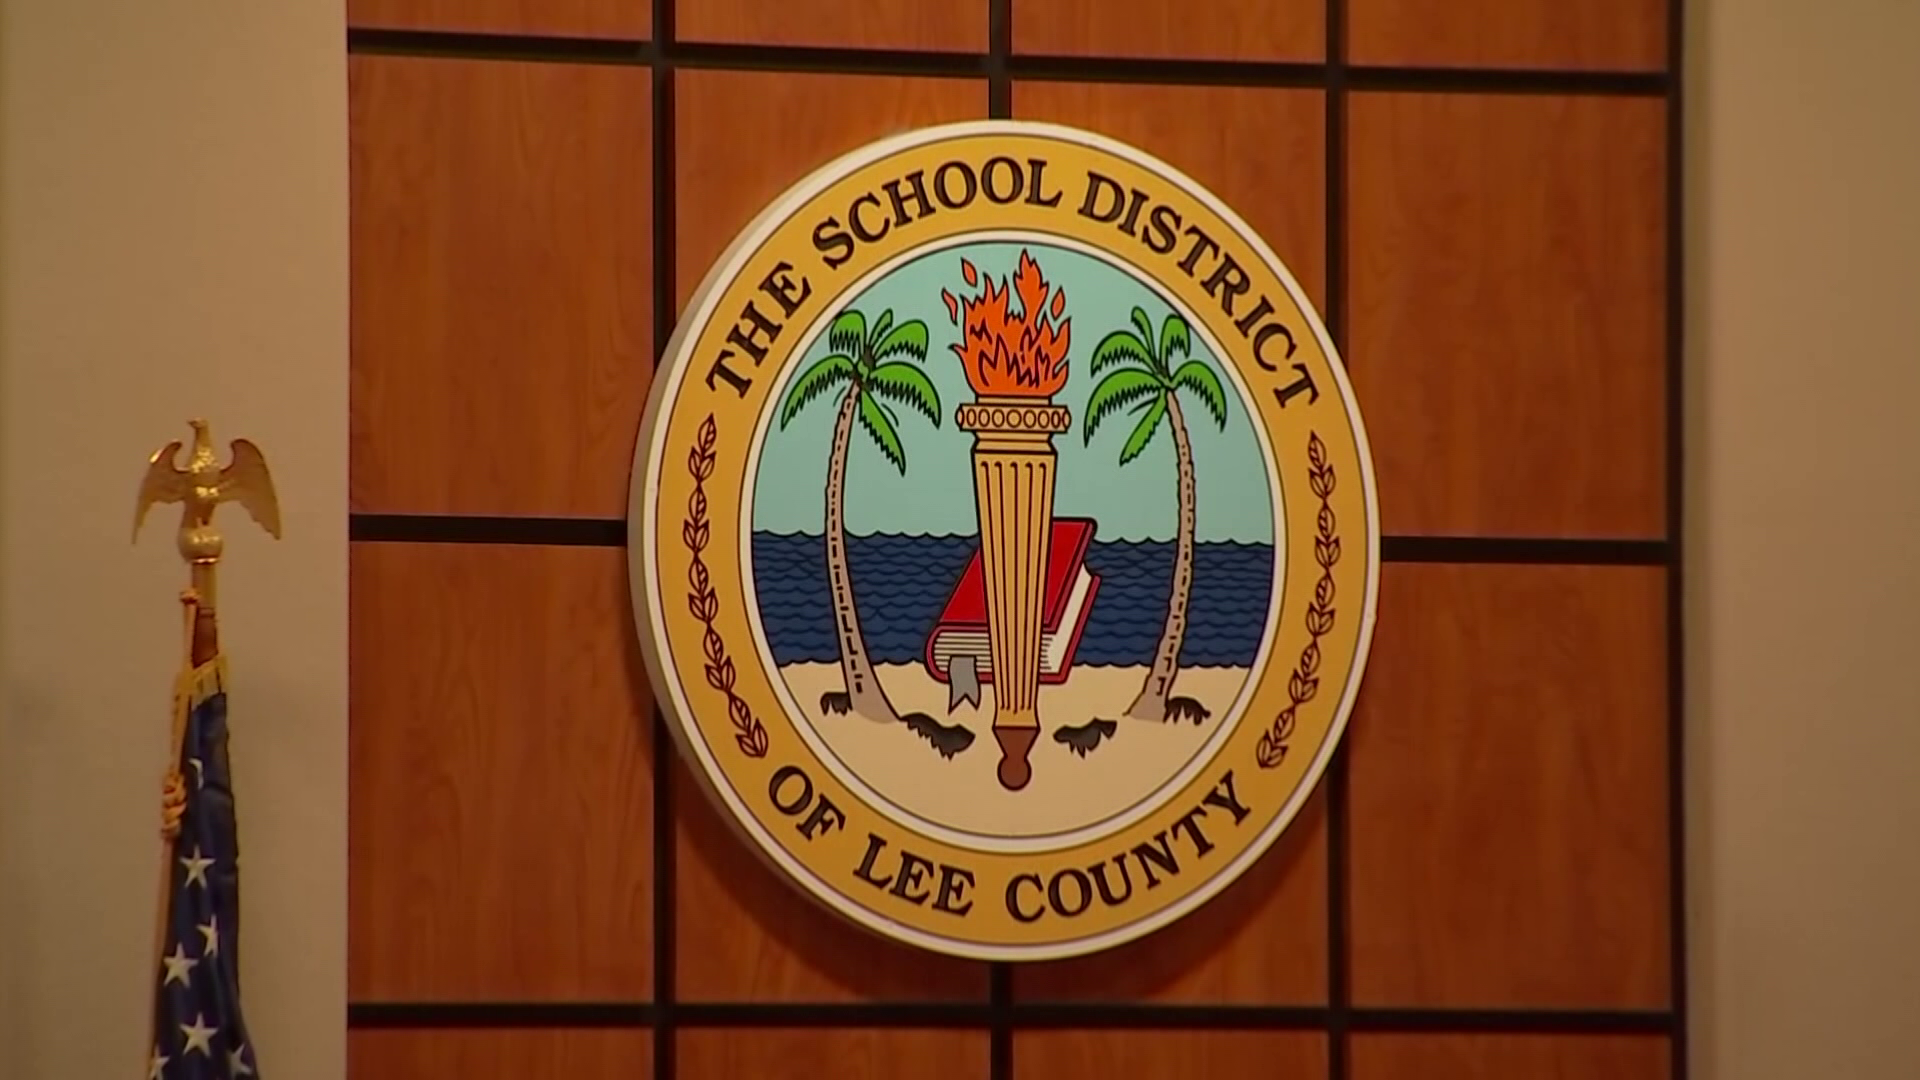 Lee County schools reach out to veterans amid shortage of teachers